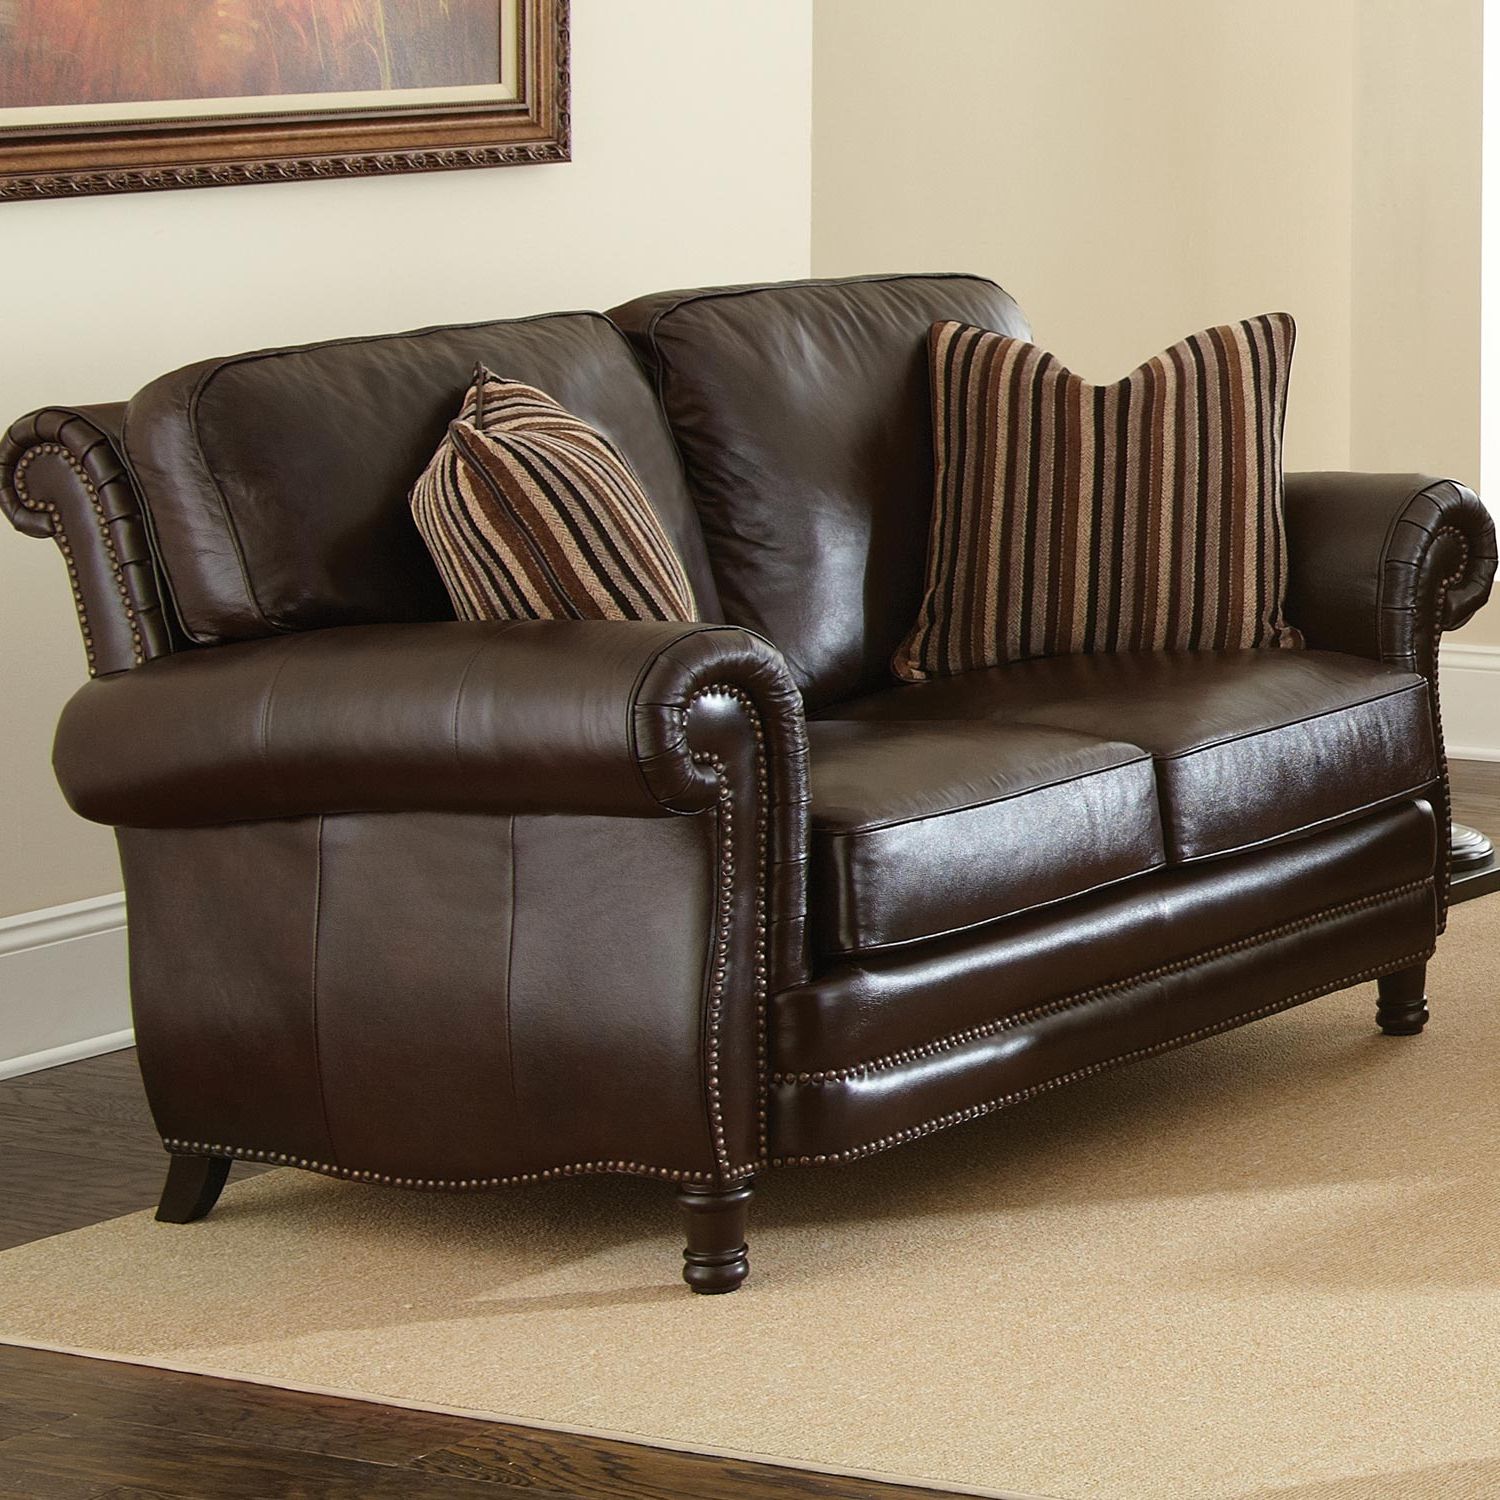 Featured Photo of 15 Ideas of Sofas in Chocolate Brown